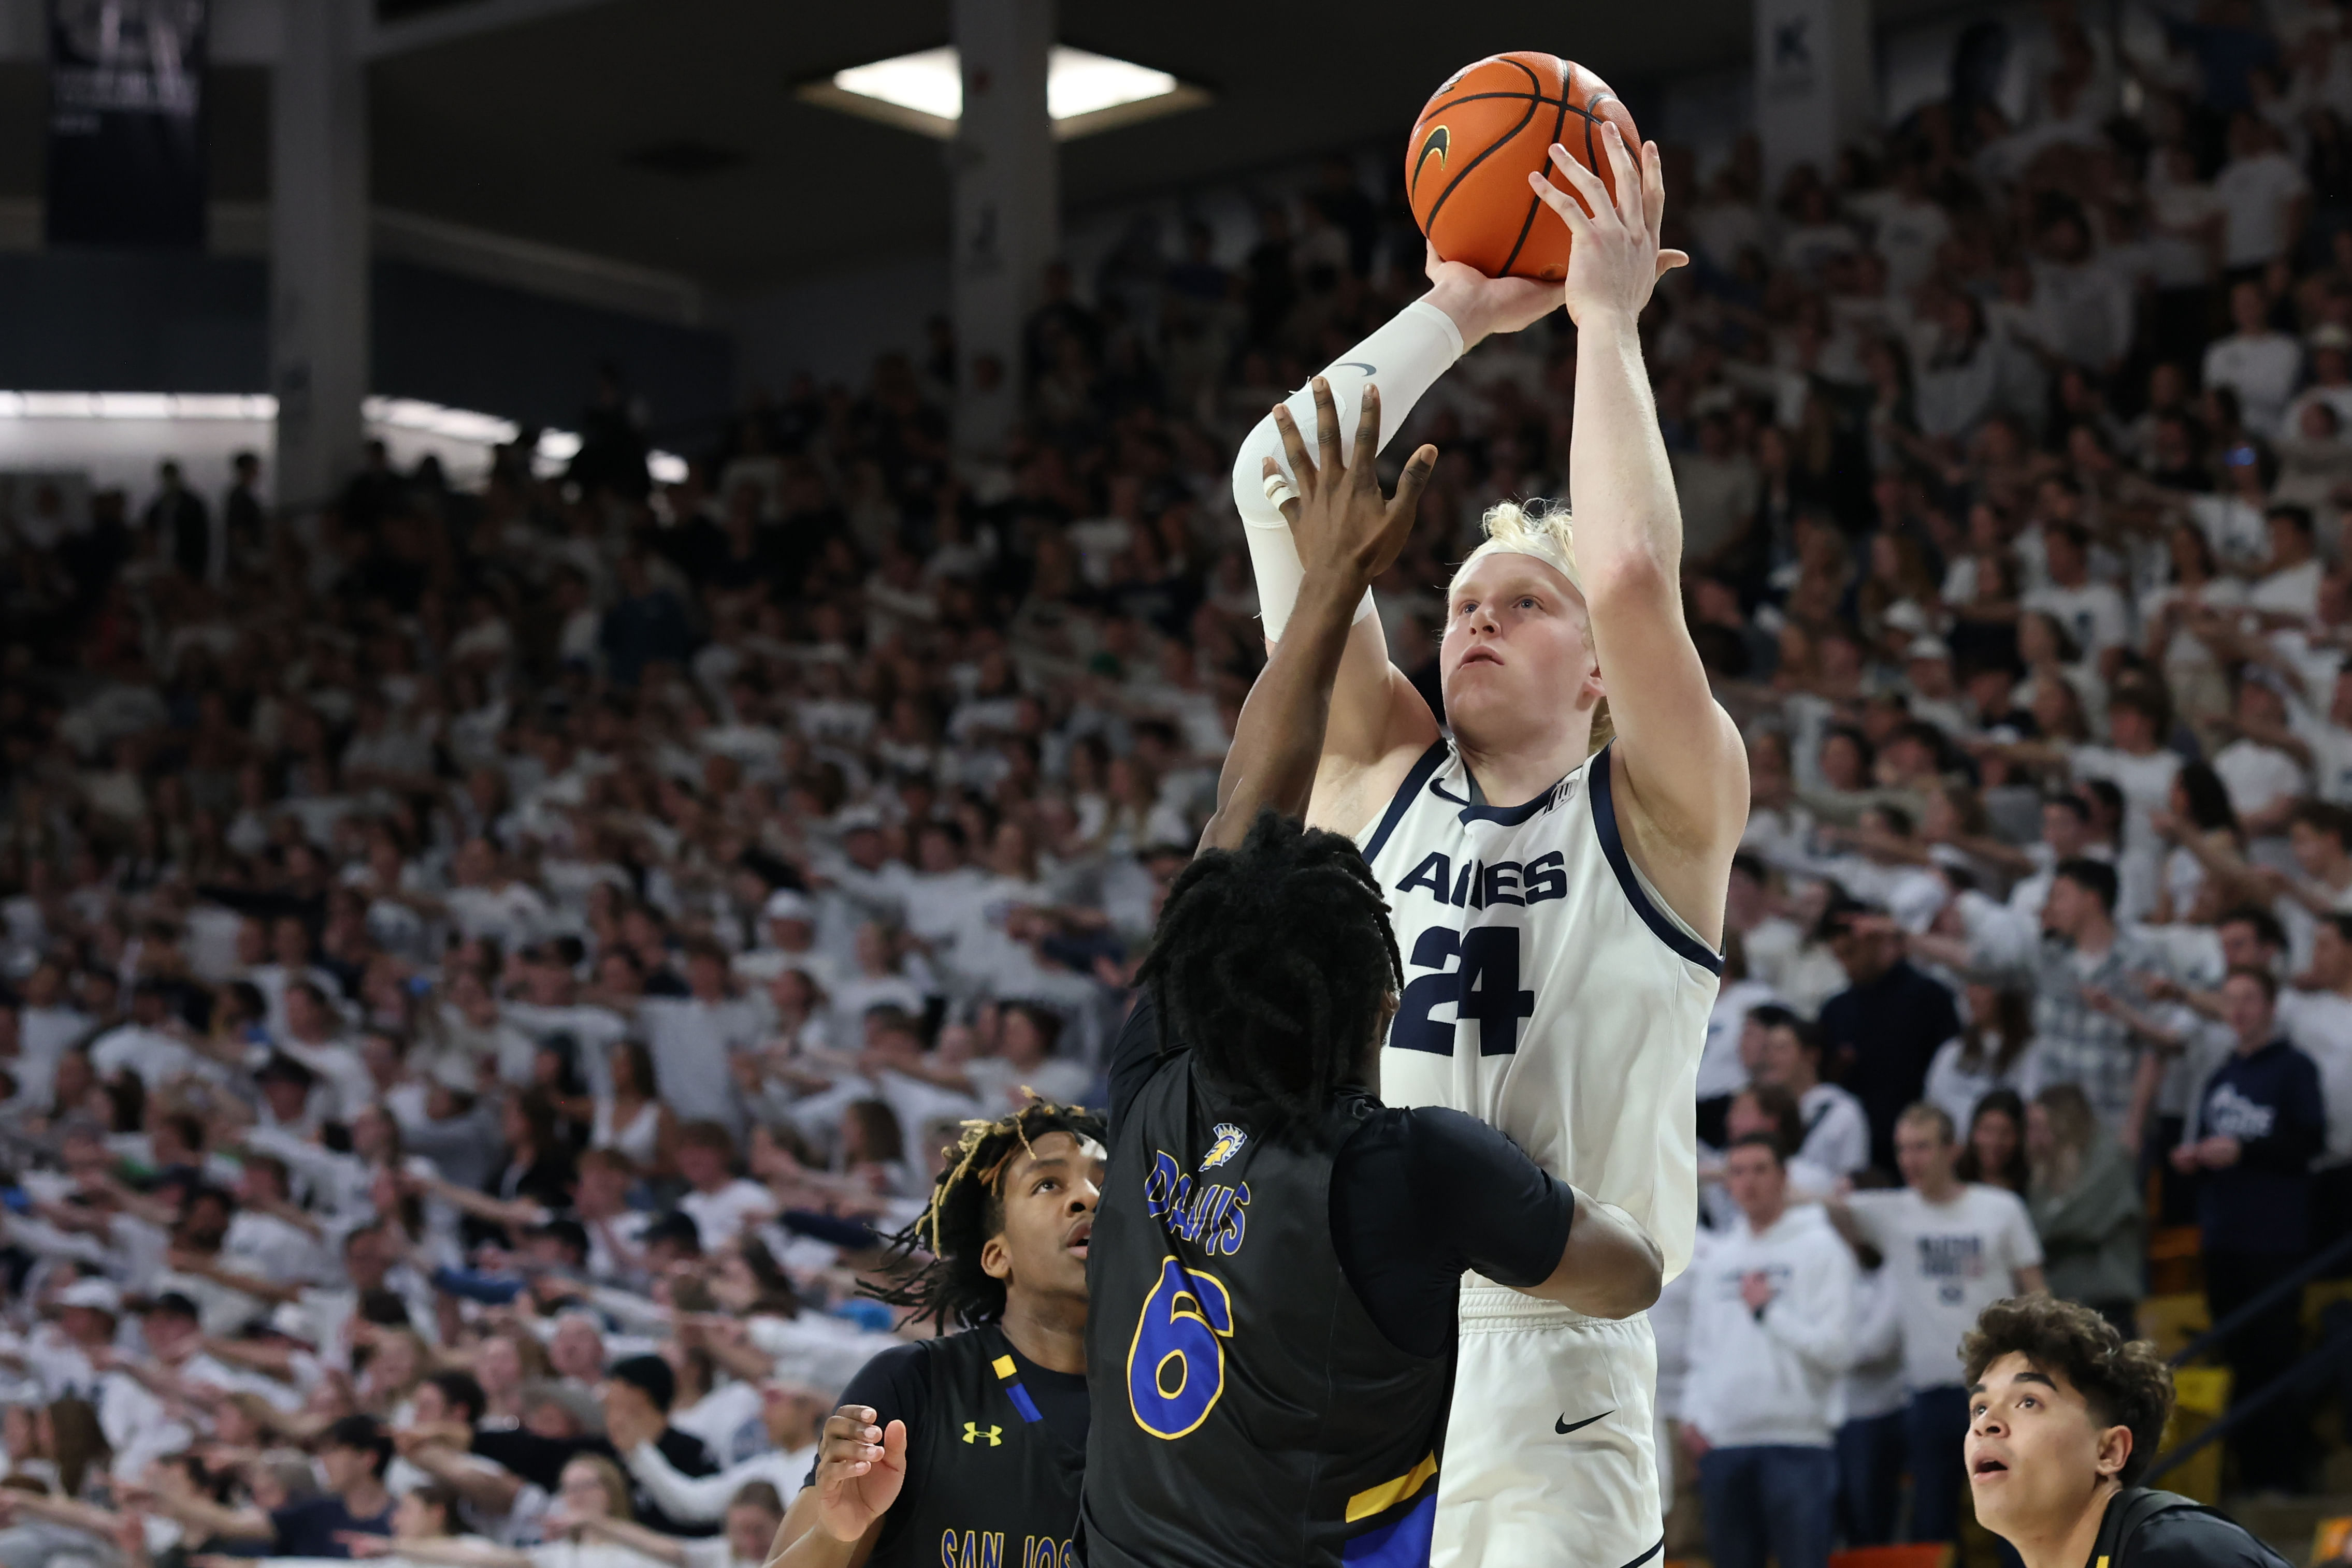 Karson Templin played for 23 games last season and averaged 2.5 ppg for Utah State,